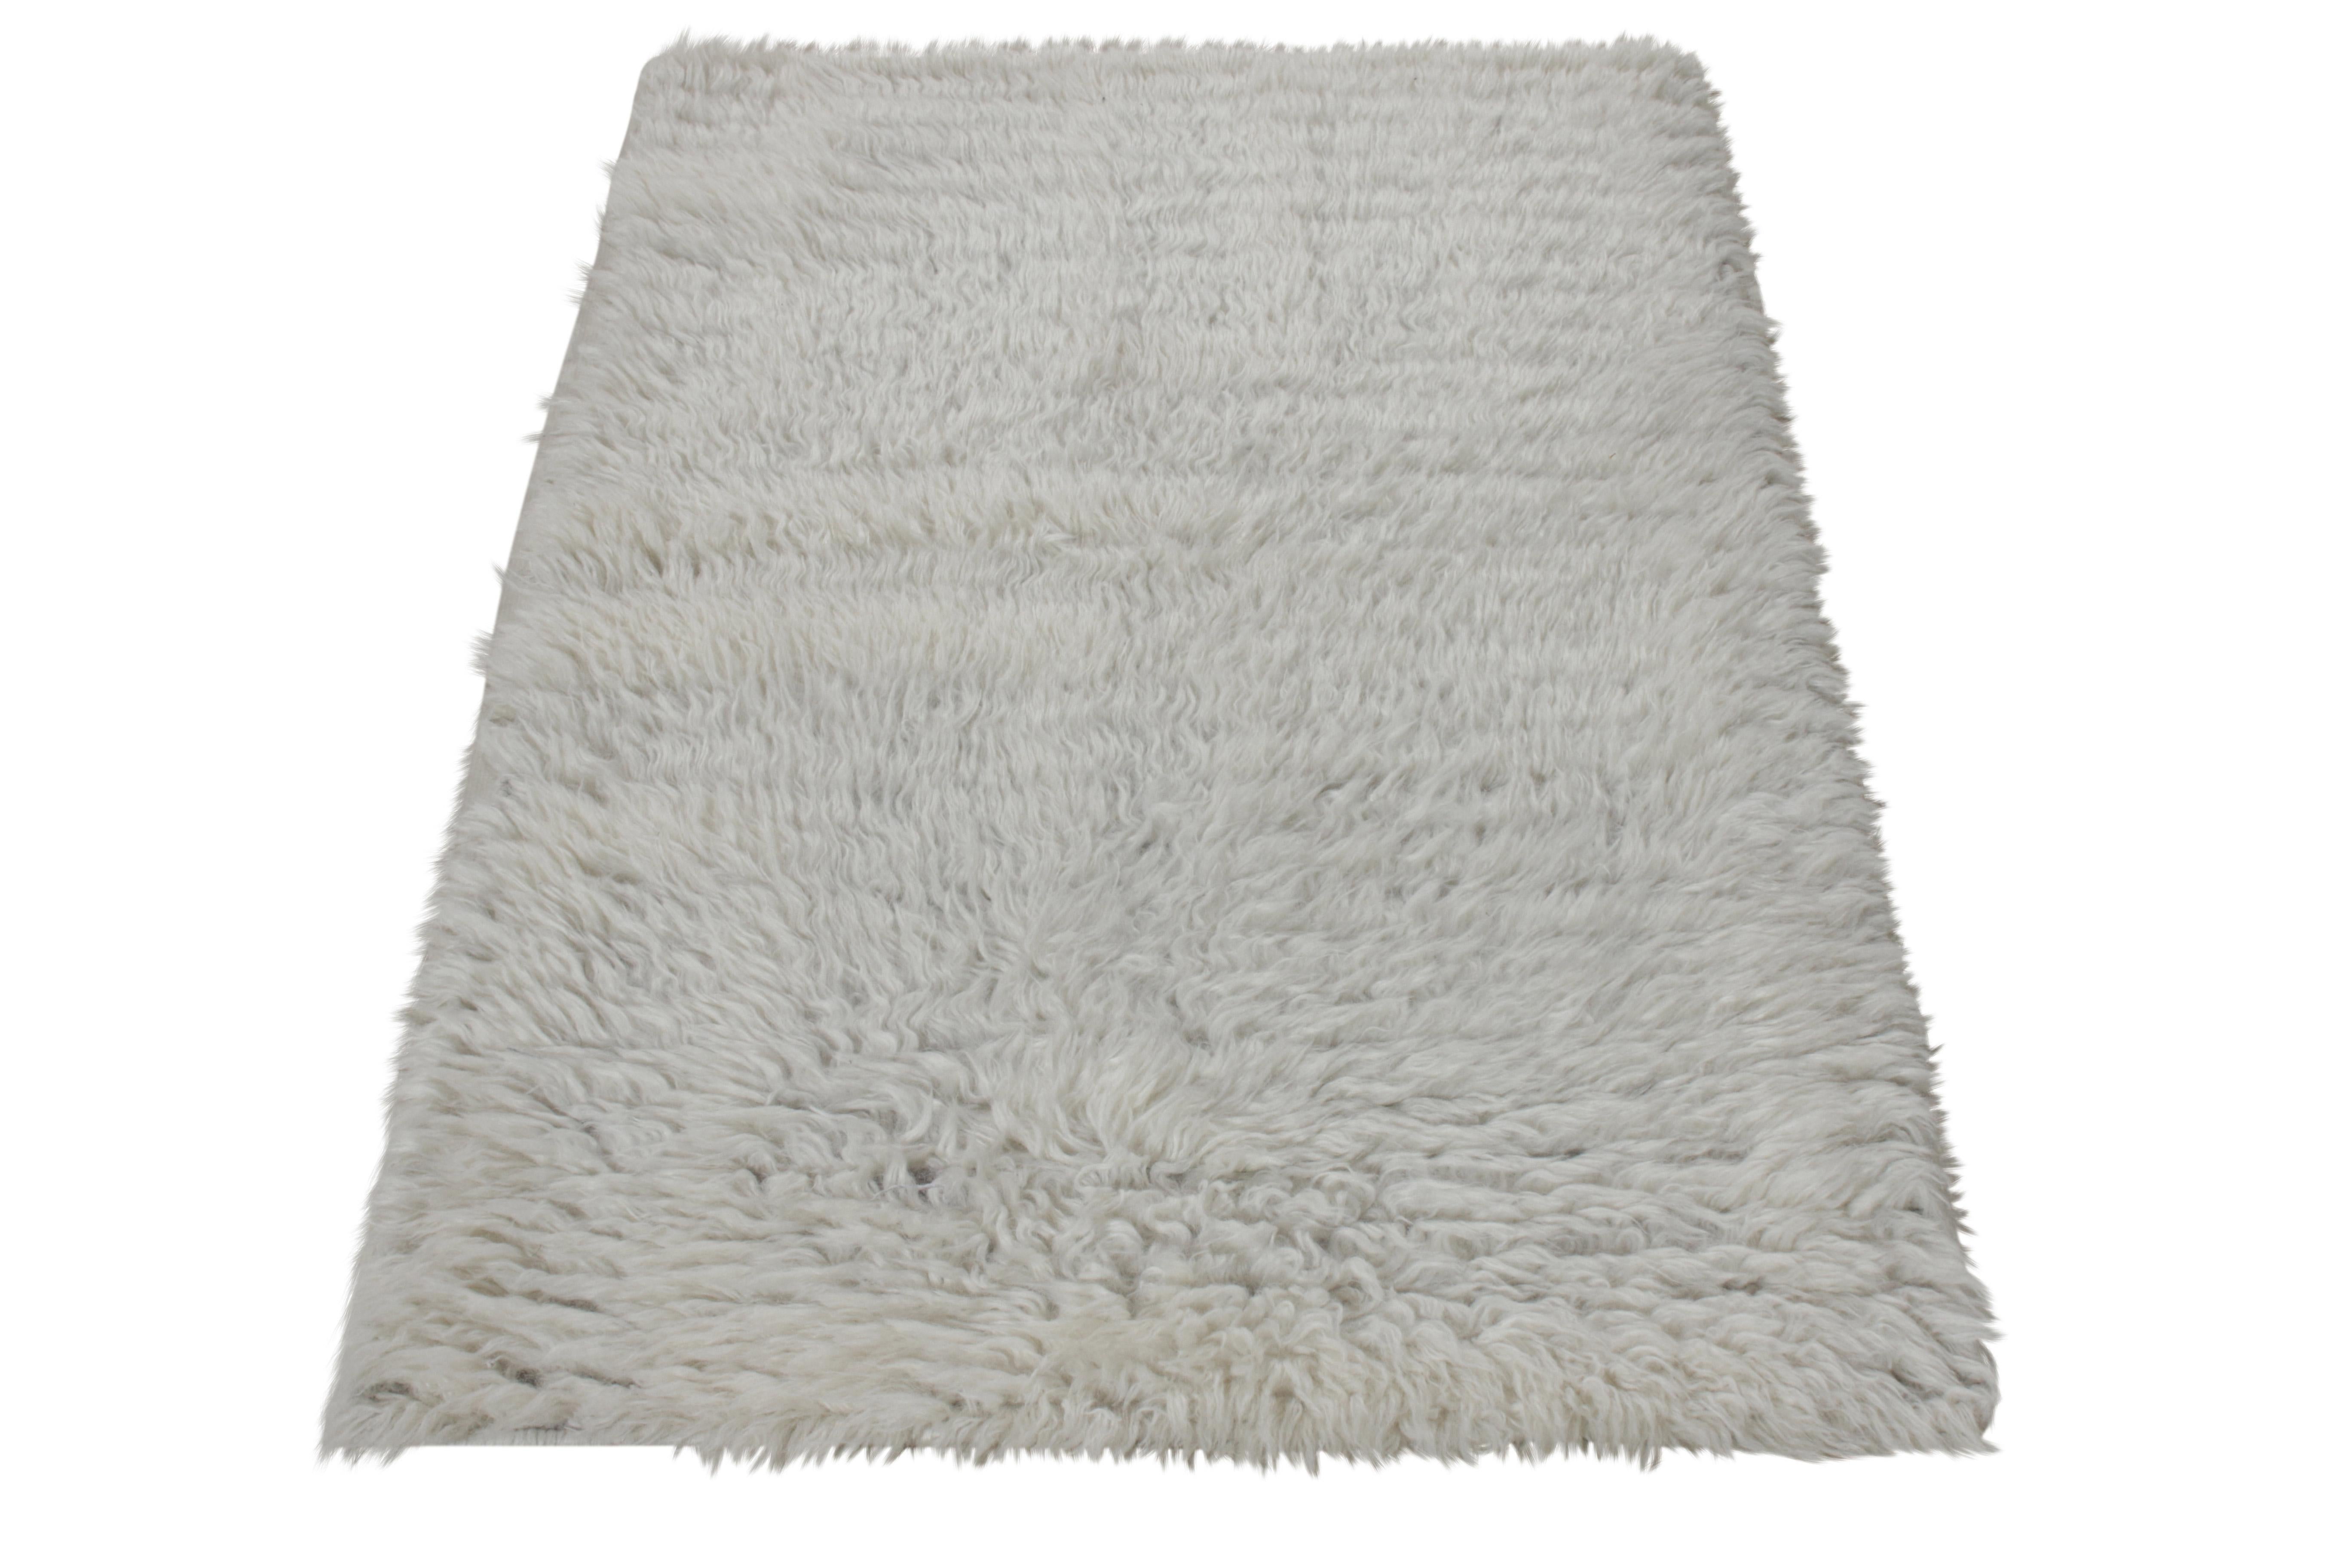 Modern Rug & Kilim’s Moroccan Style Shag Rug in Solid Gray-White, High Pile For Sale